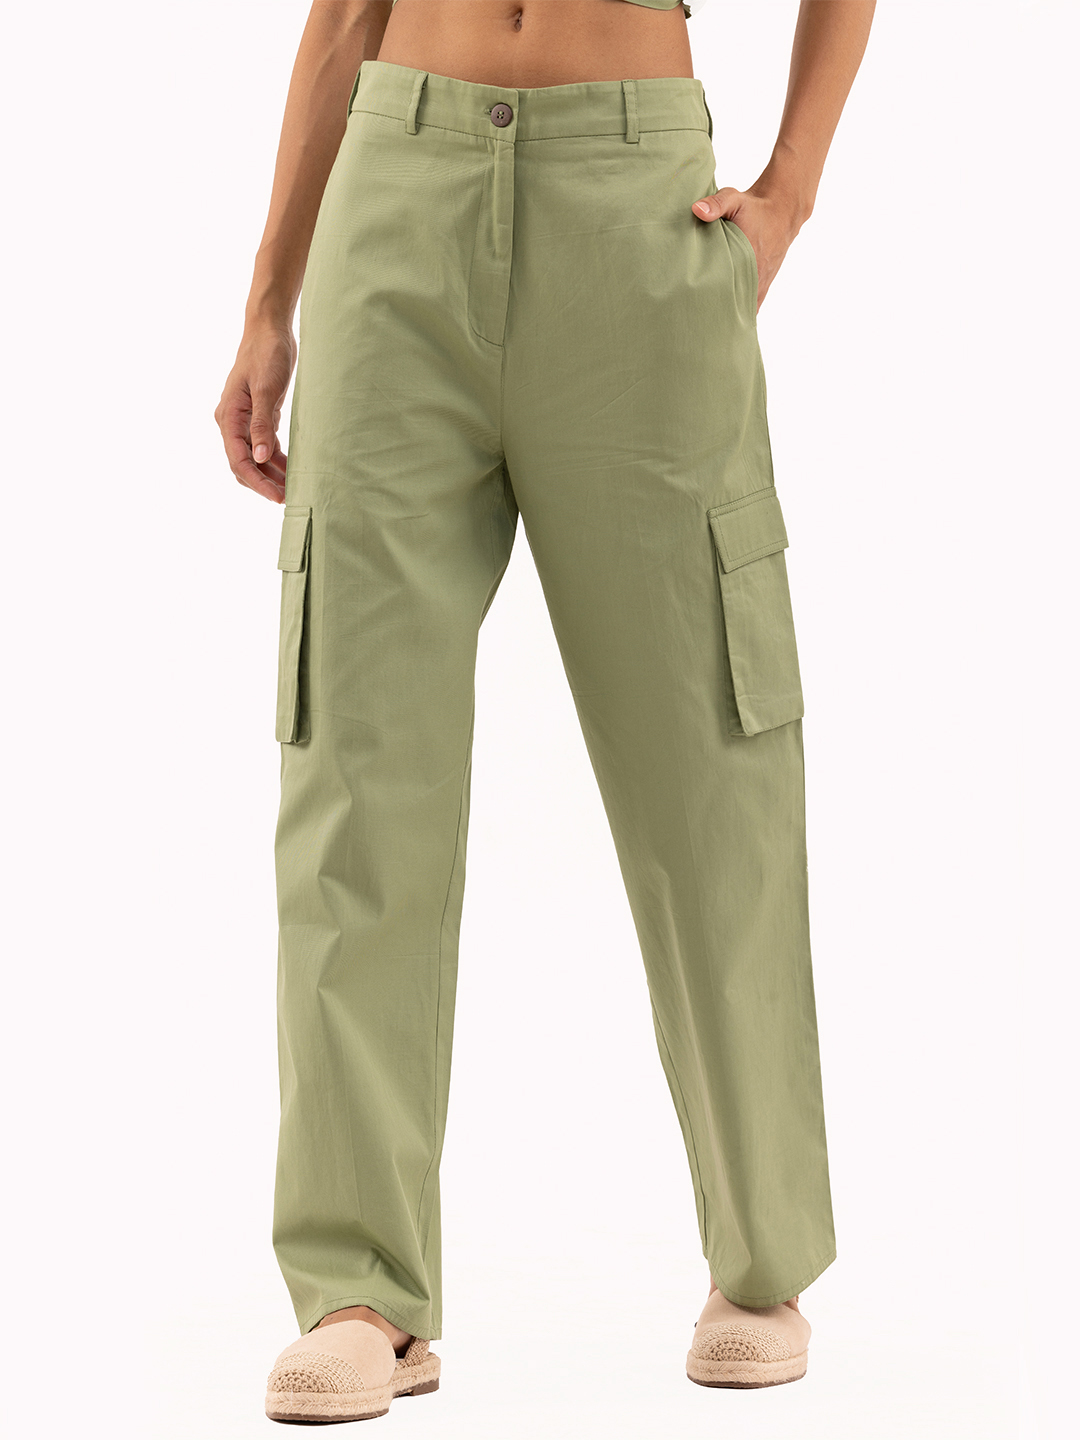 Women's NSE Convertible Straight Loose Cargo Trousers | The North Face